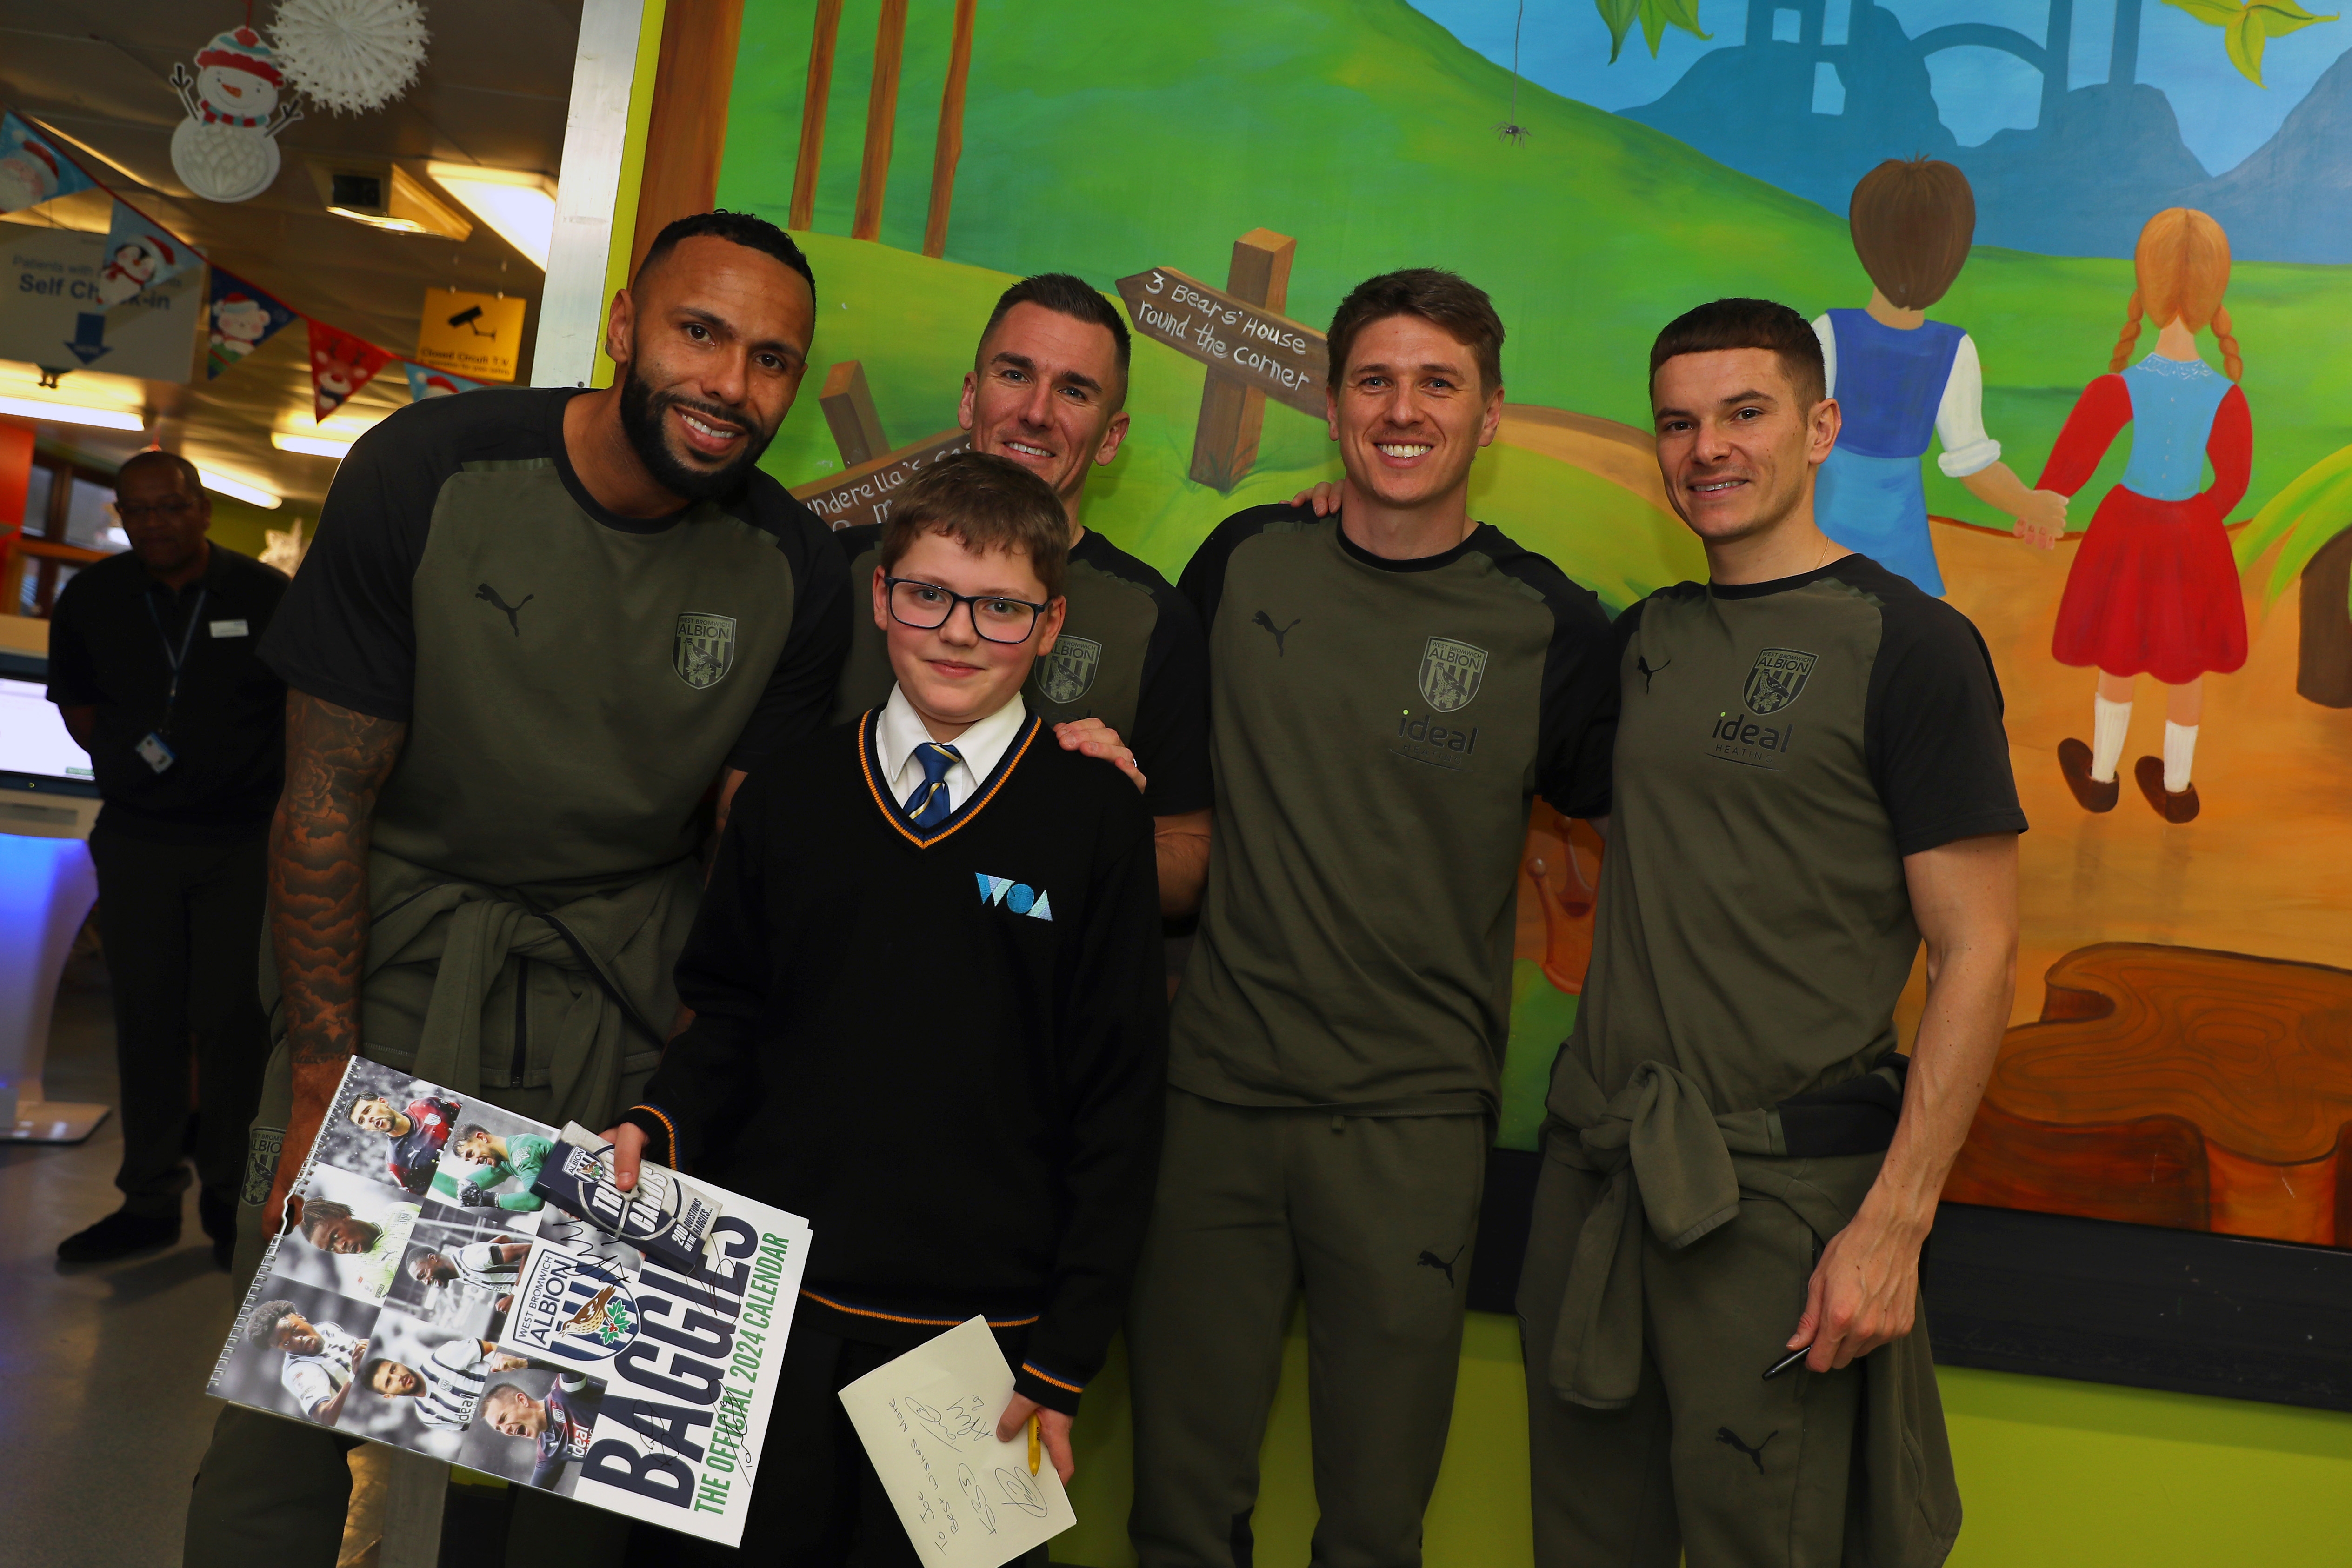 Kyle Bartley, Conor Townsend, Adam Reach and Jed Wallace pose for a photo with patients at Sandwell General Hospital